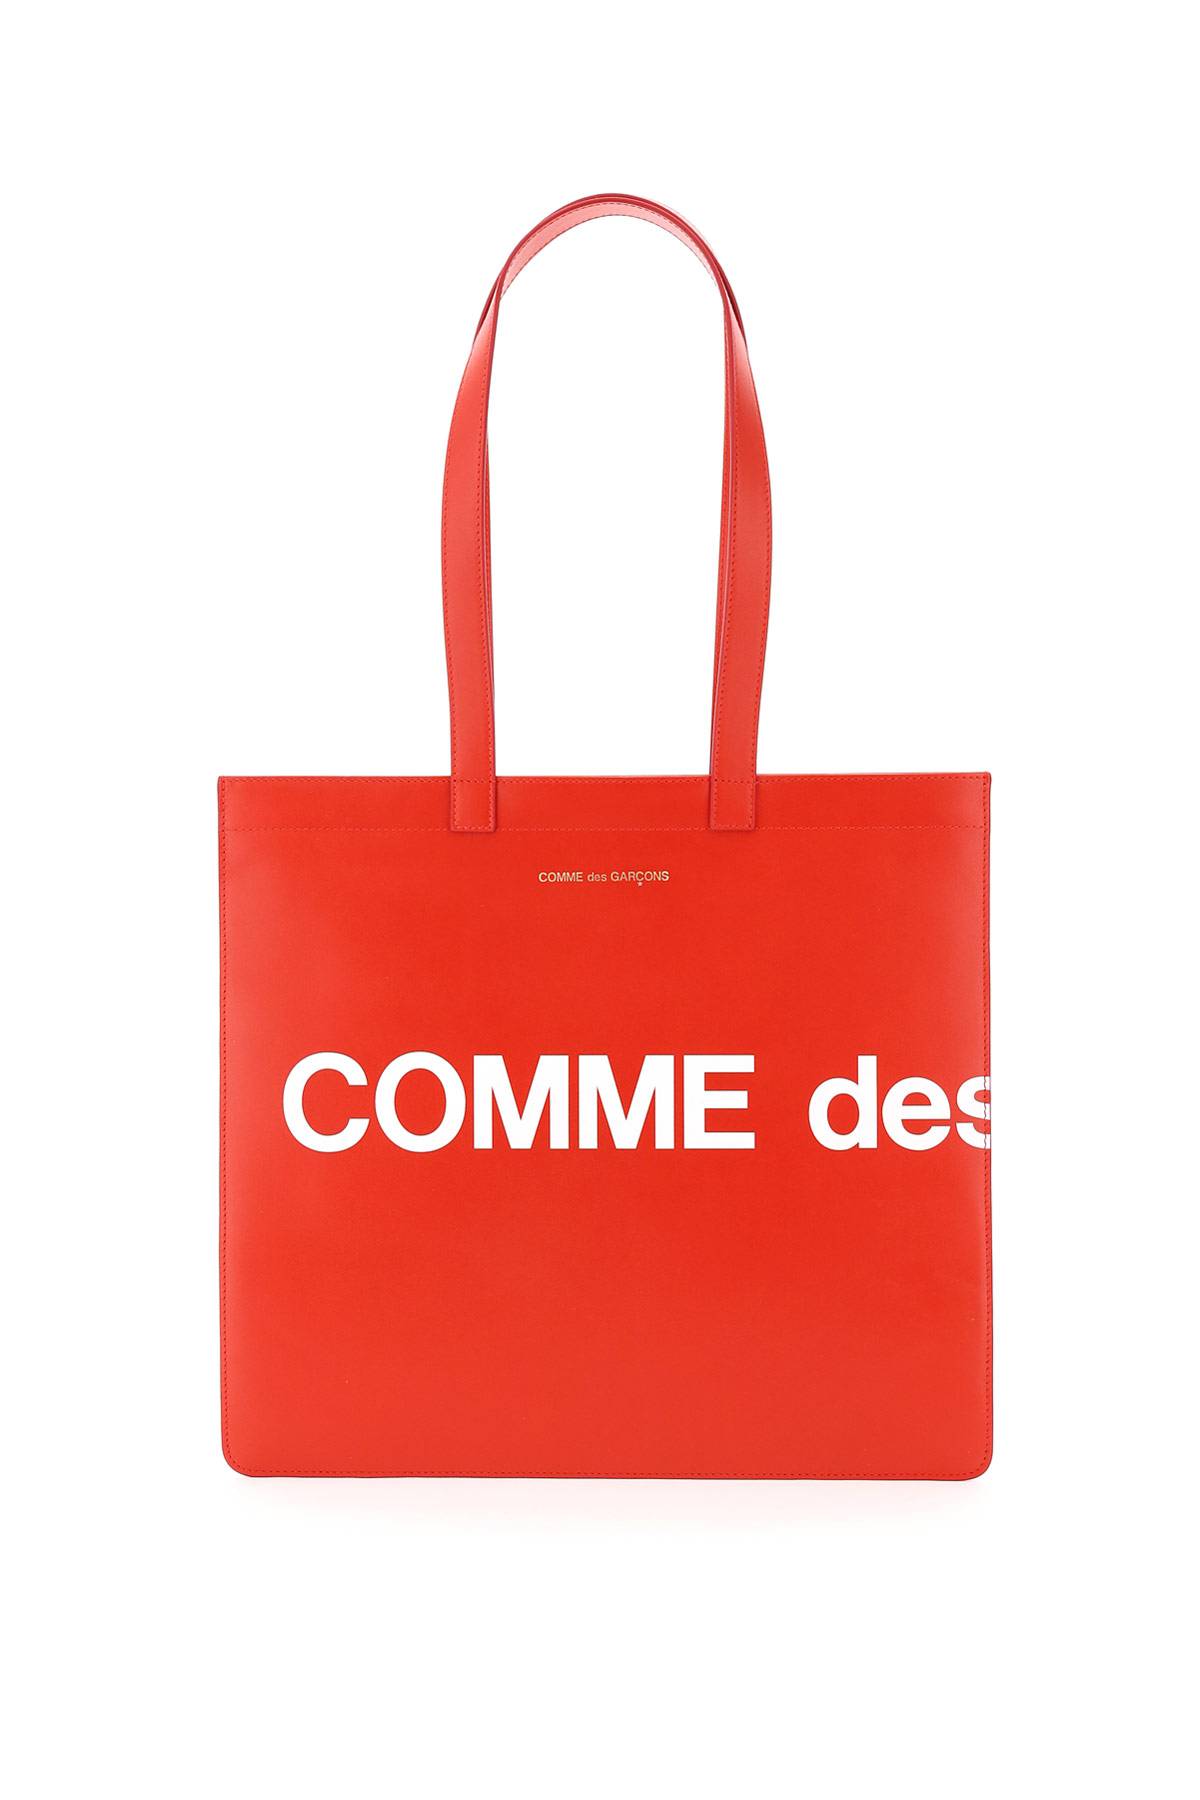 COMME DES GARCONS WALLET COMME DES GARCONS WALLET leather tote bag with logo